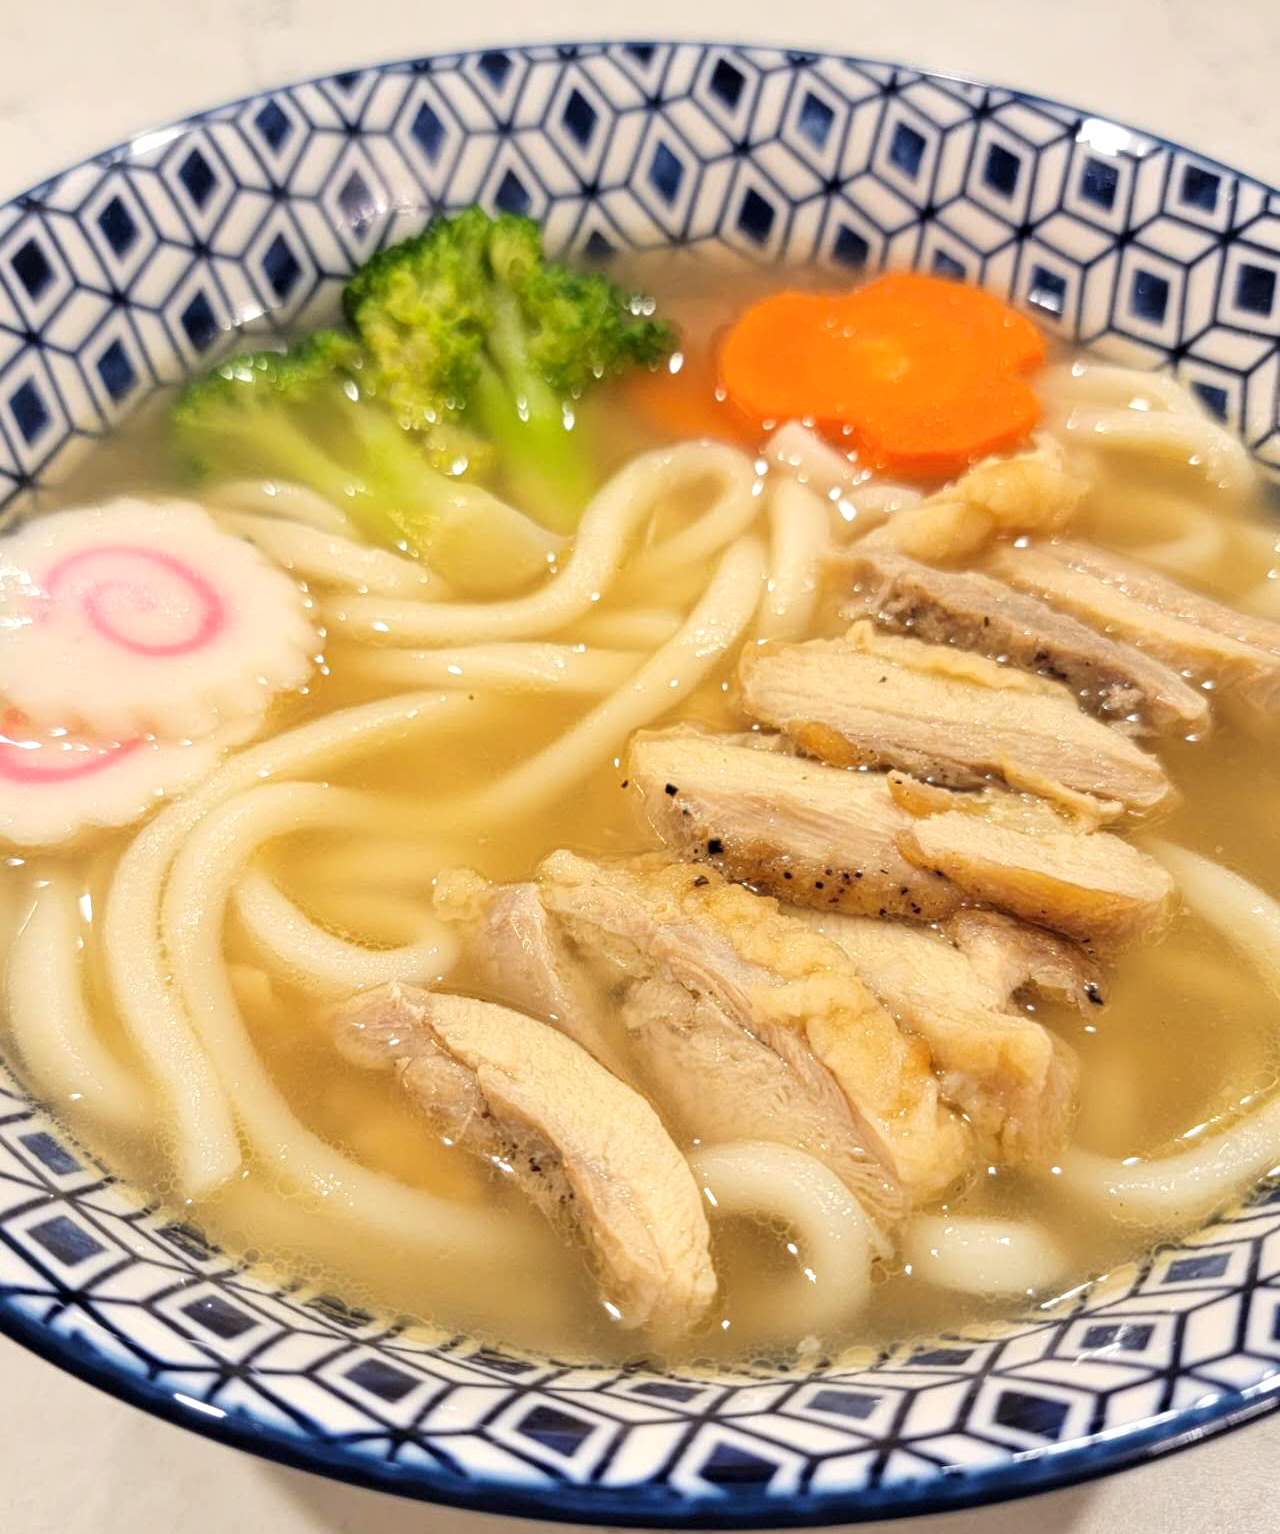 Japanese Grilled Chicken Udon